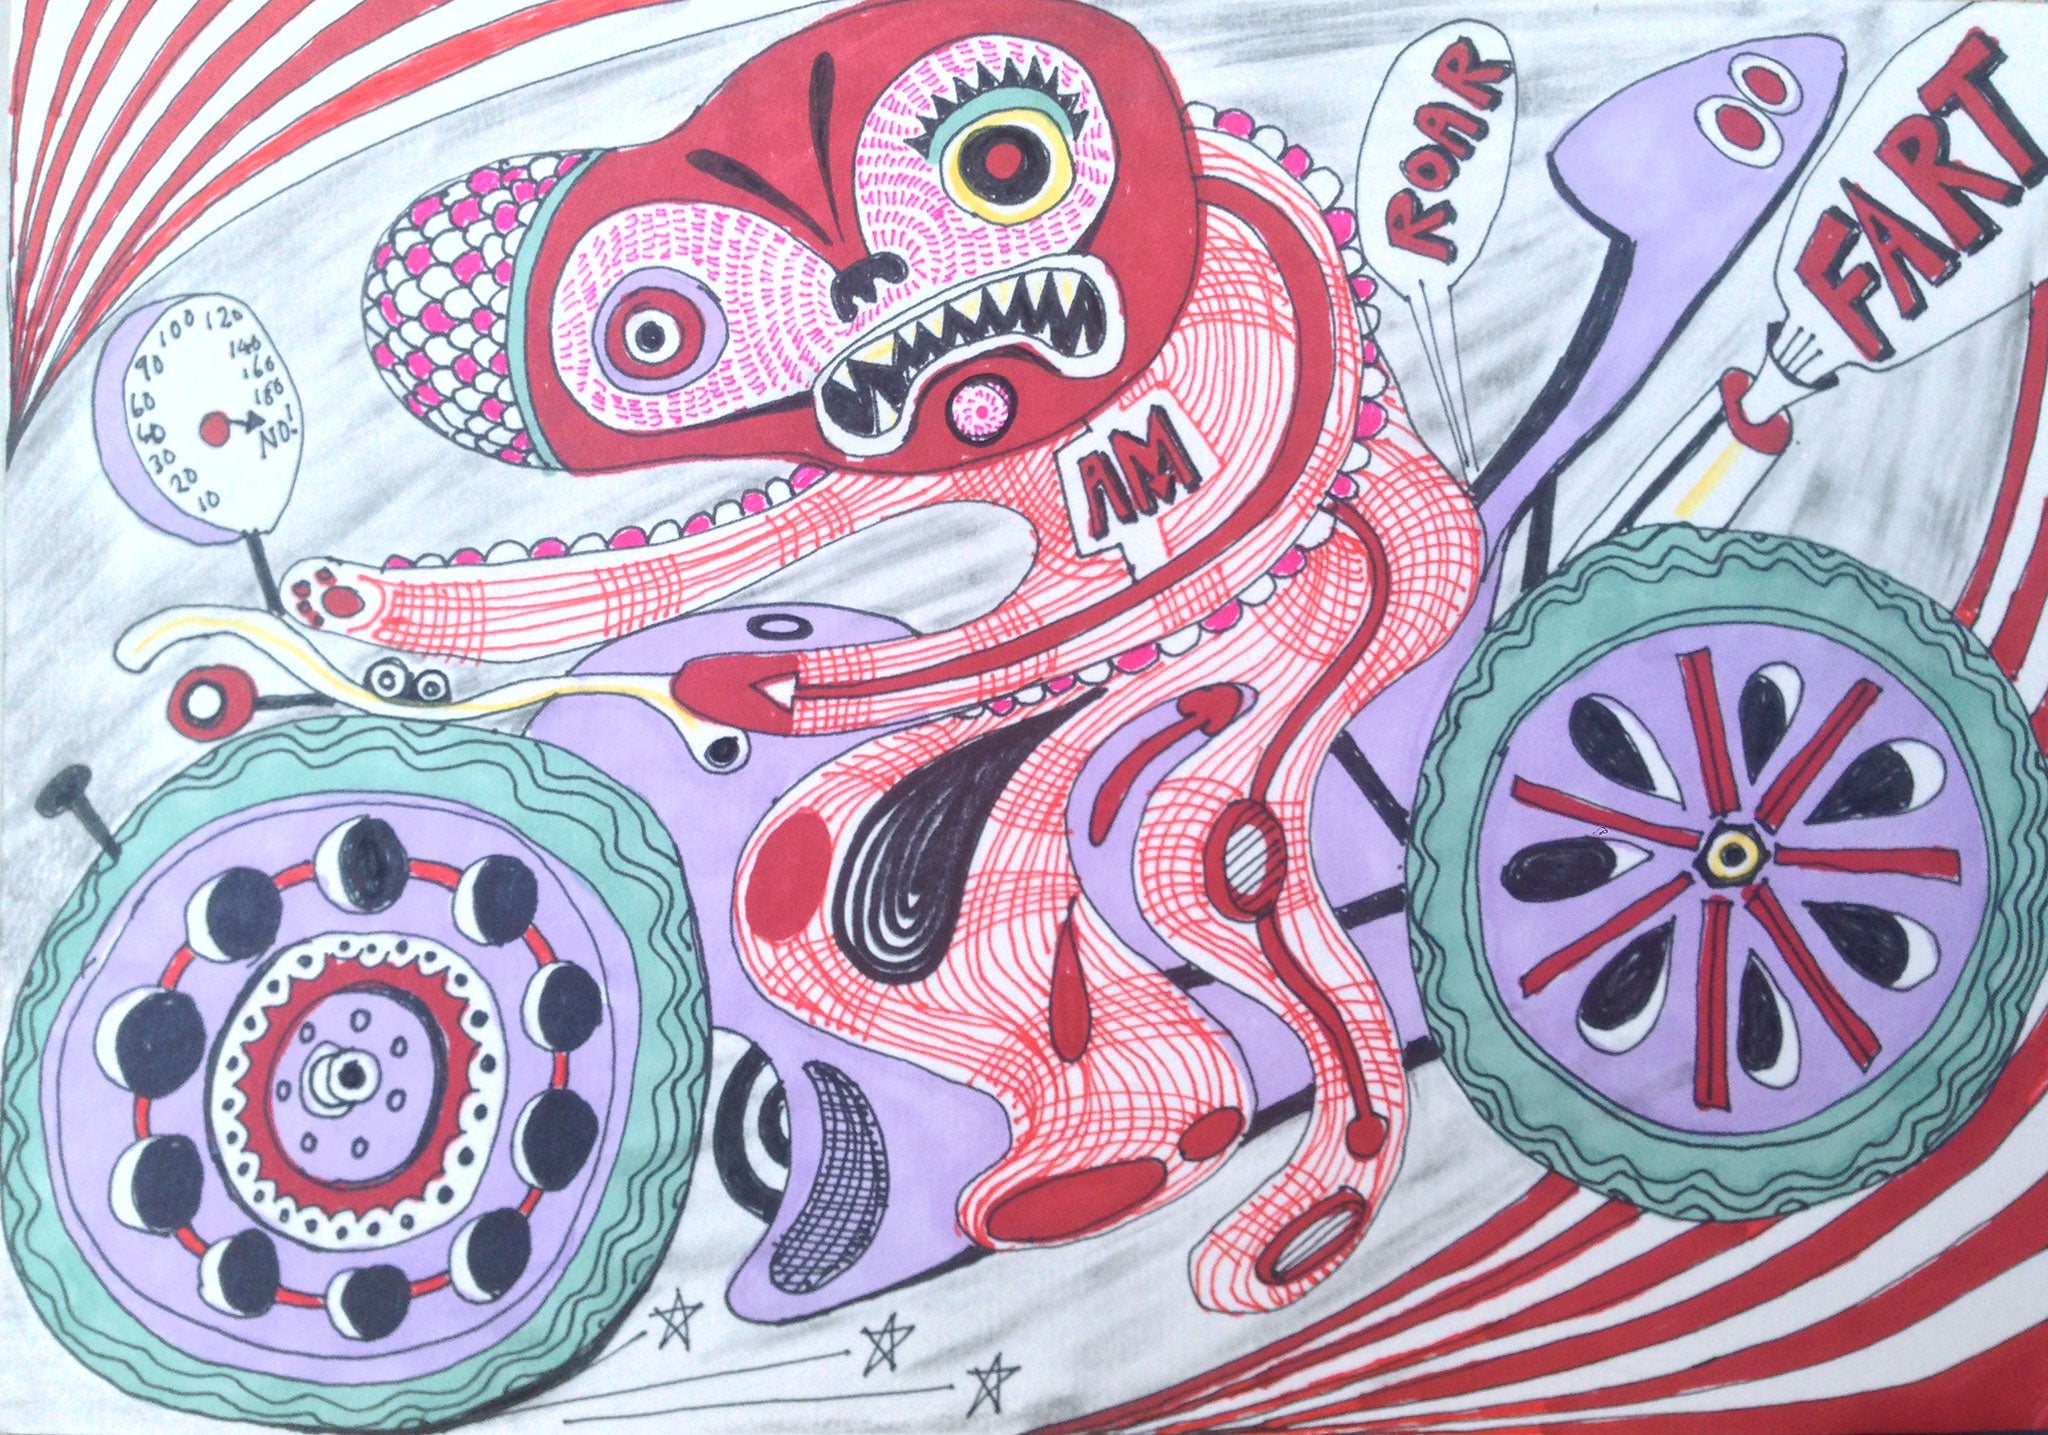 Grayson Perry's charity postcard is being sold in an online auction to raise money for fighting cancer